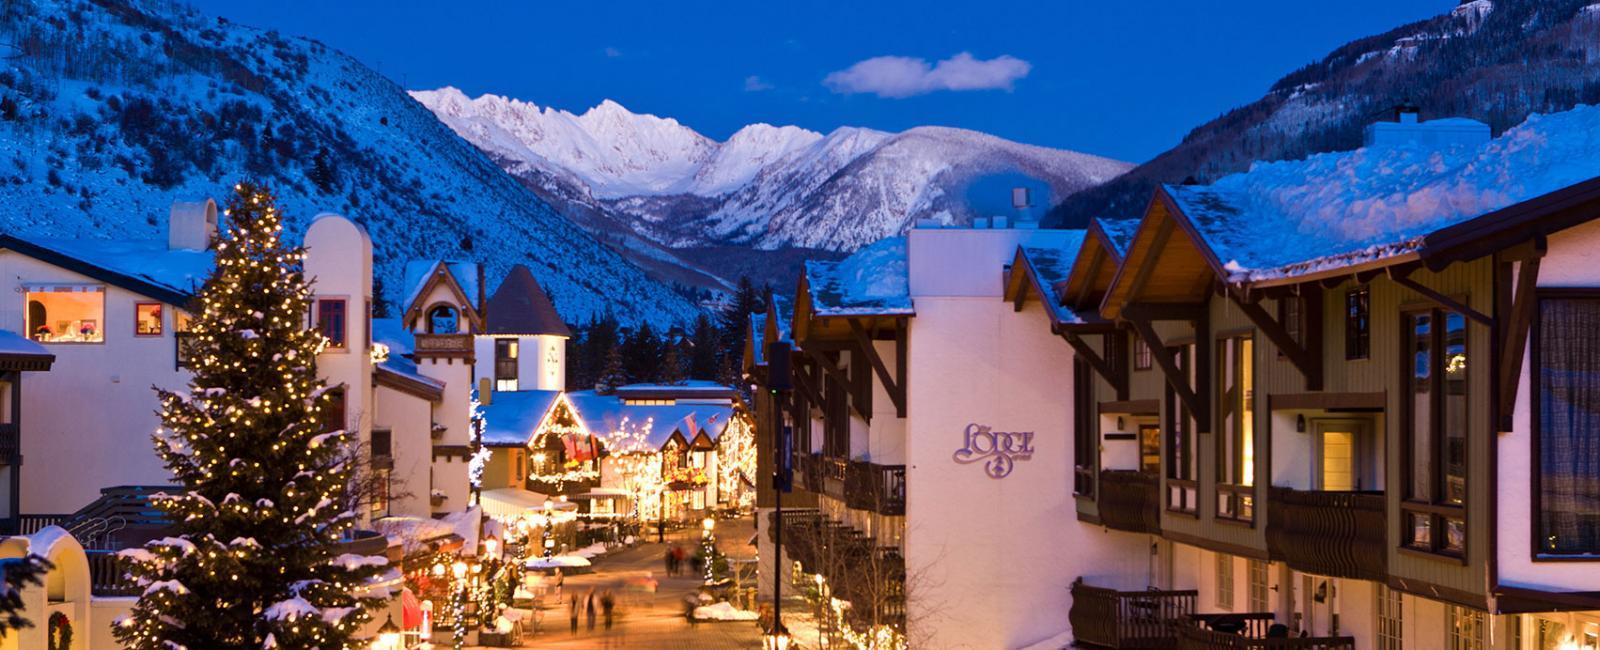 Vail Realty Vacation Rentals And Real Estate In The Valley